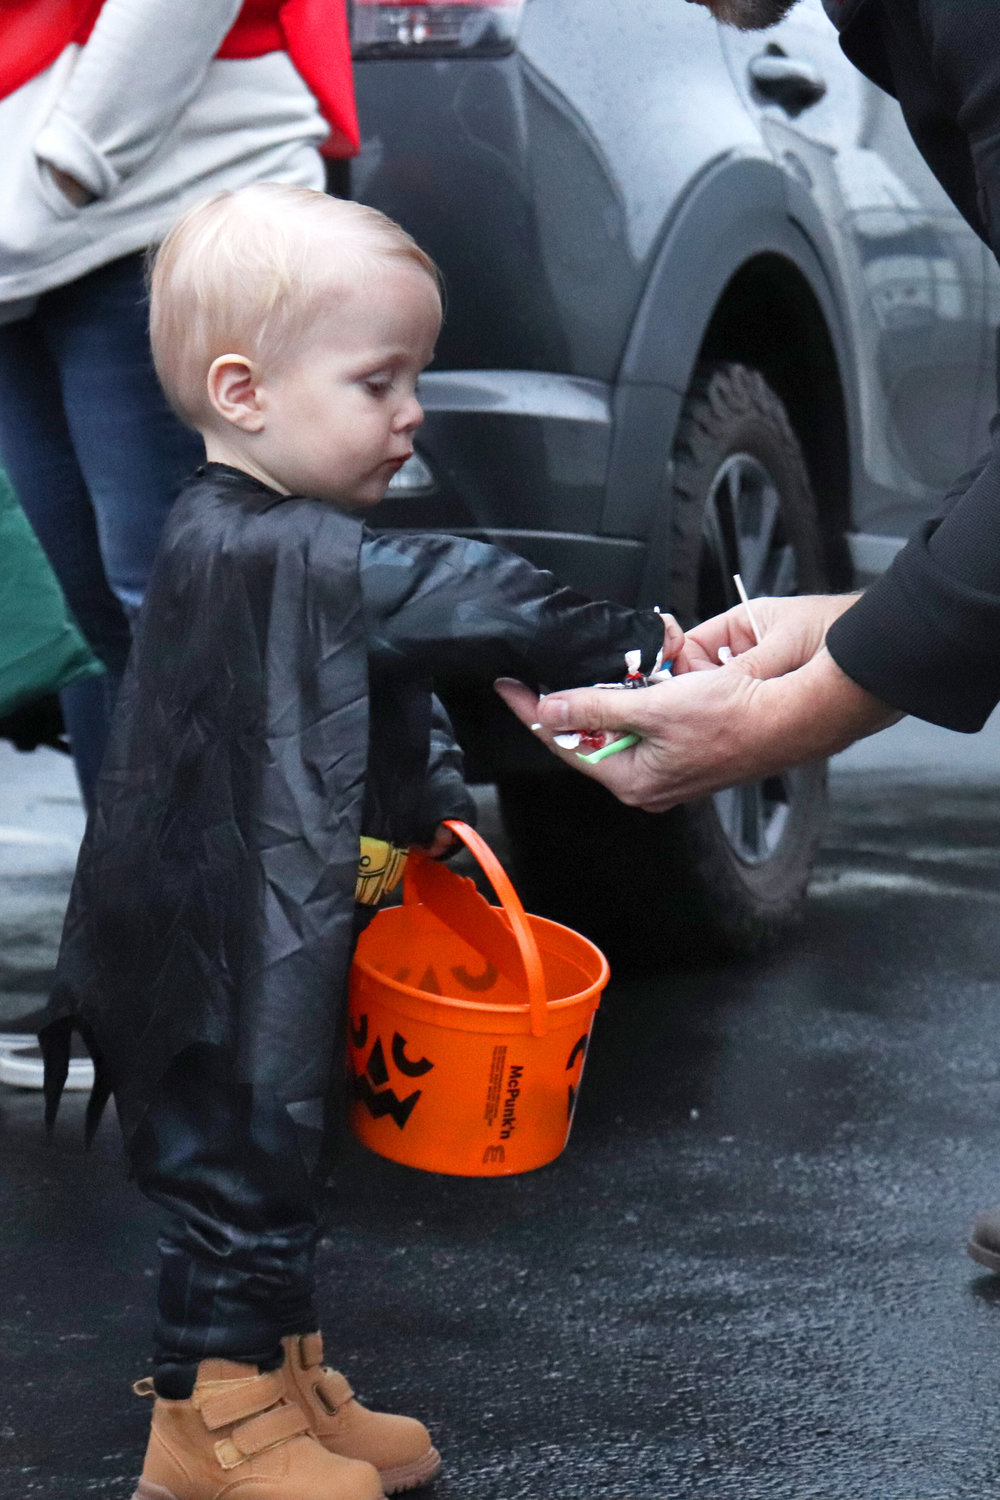 Leaf, 1, picks out candy during a trunk or treat event at the Lewis County Fire District 5 station in Napavine on Monday.